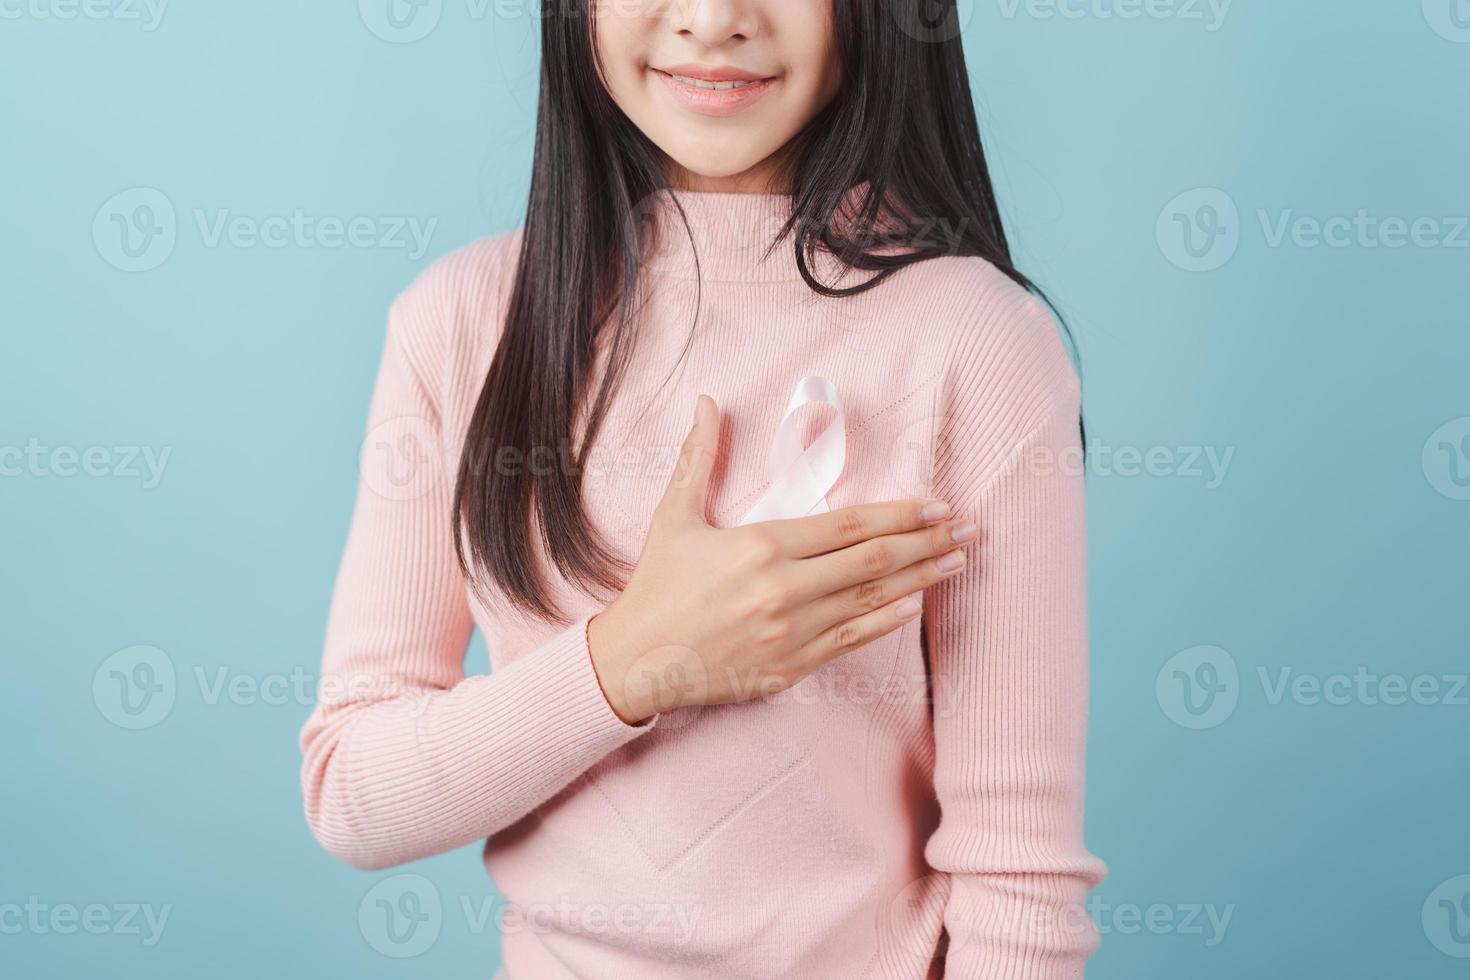 Health care, medicine and breast cancer awareness concept. Young woman in  bra with pink ribbon symbol 16403254 Stock Photo at Vecteezy